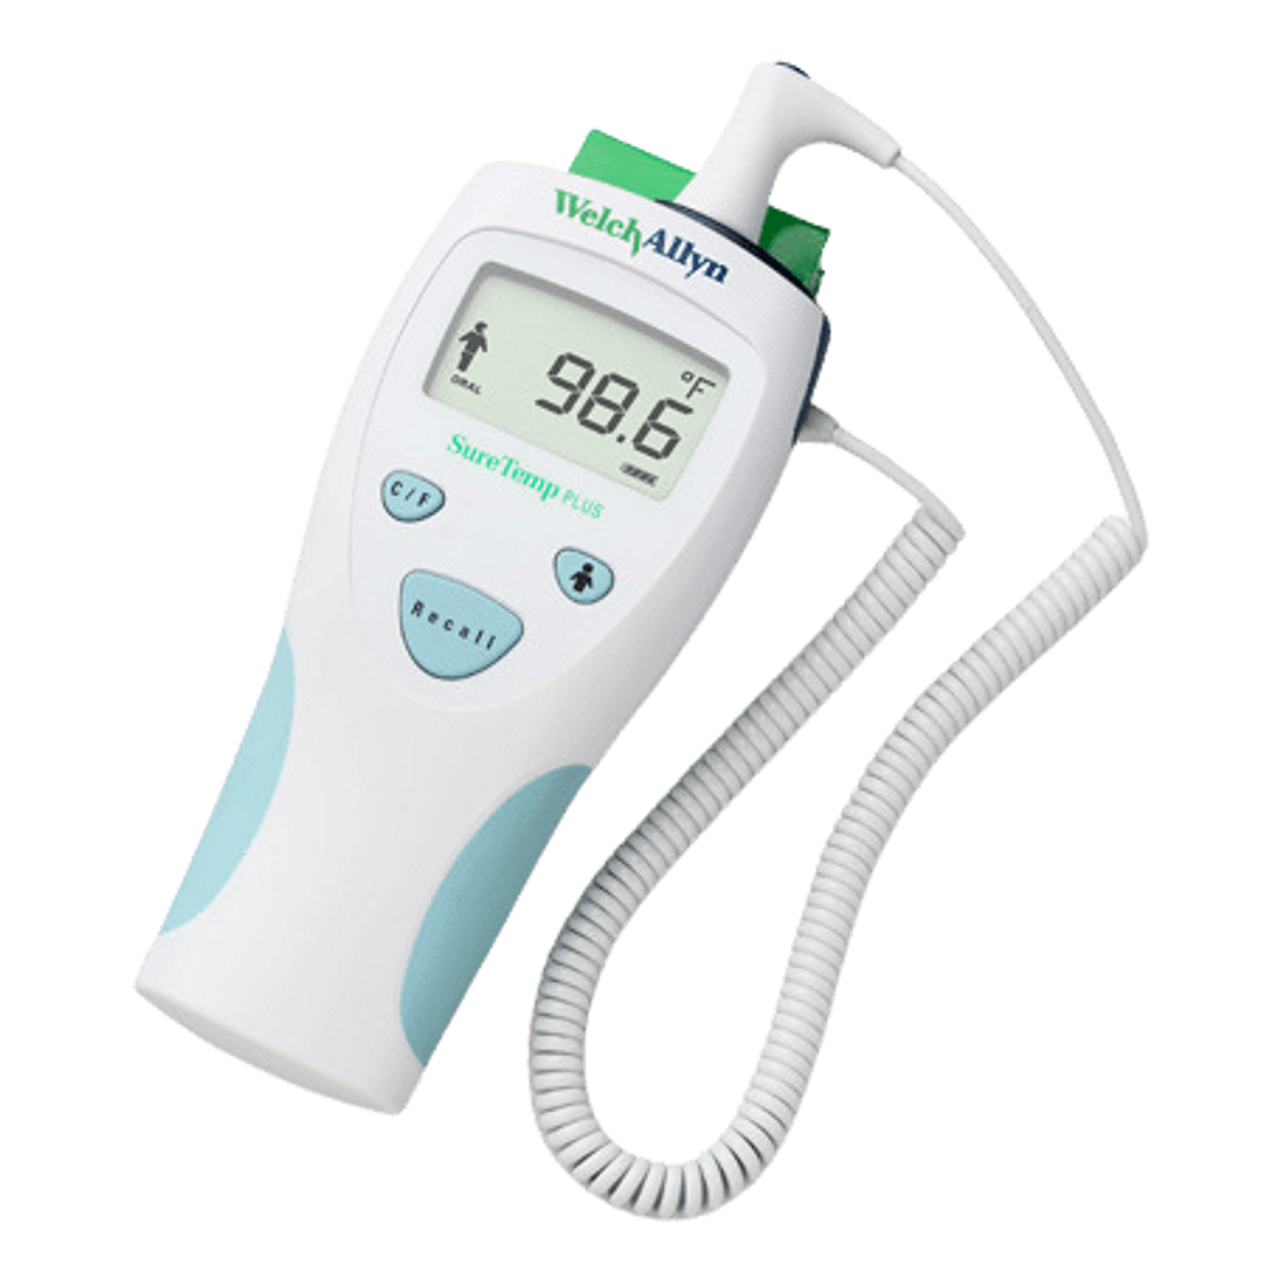 Welch Allyn SureTemp® Plus 690 Electronic Thermometer